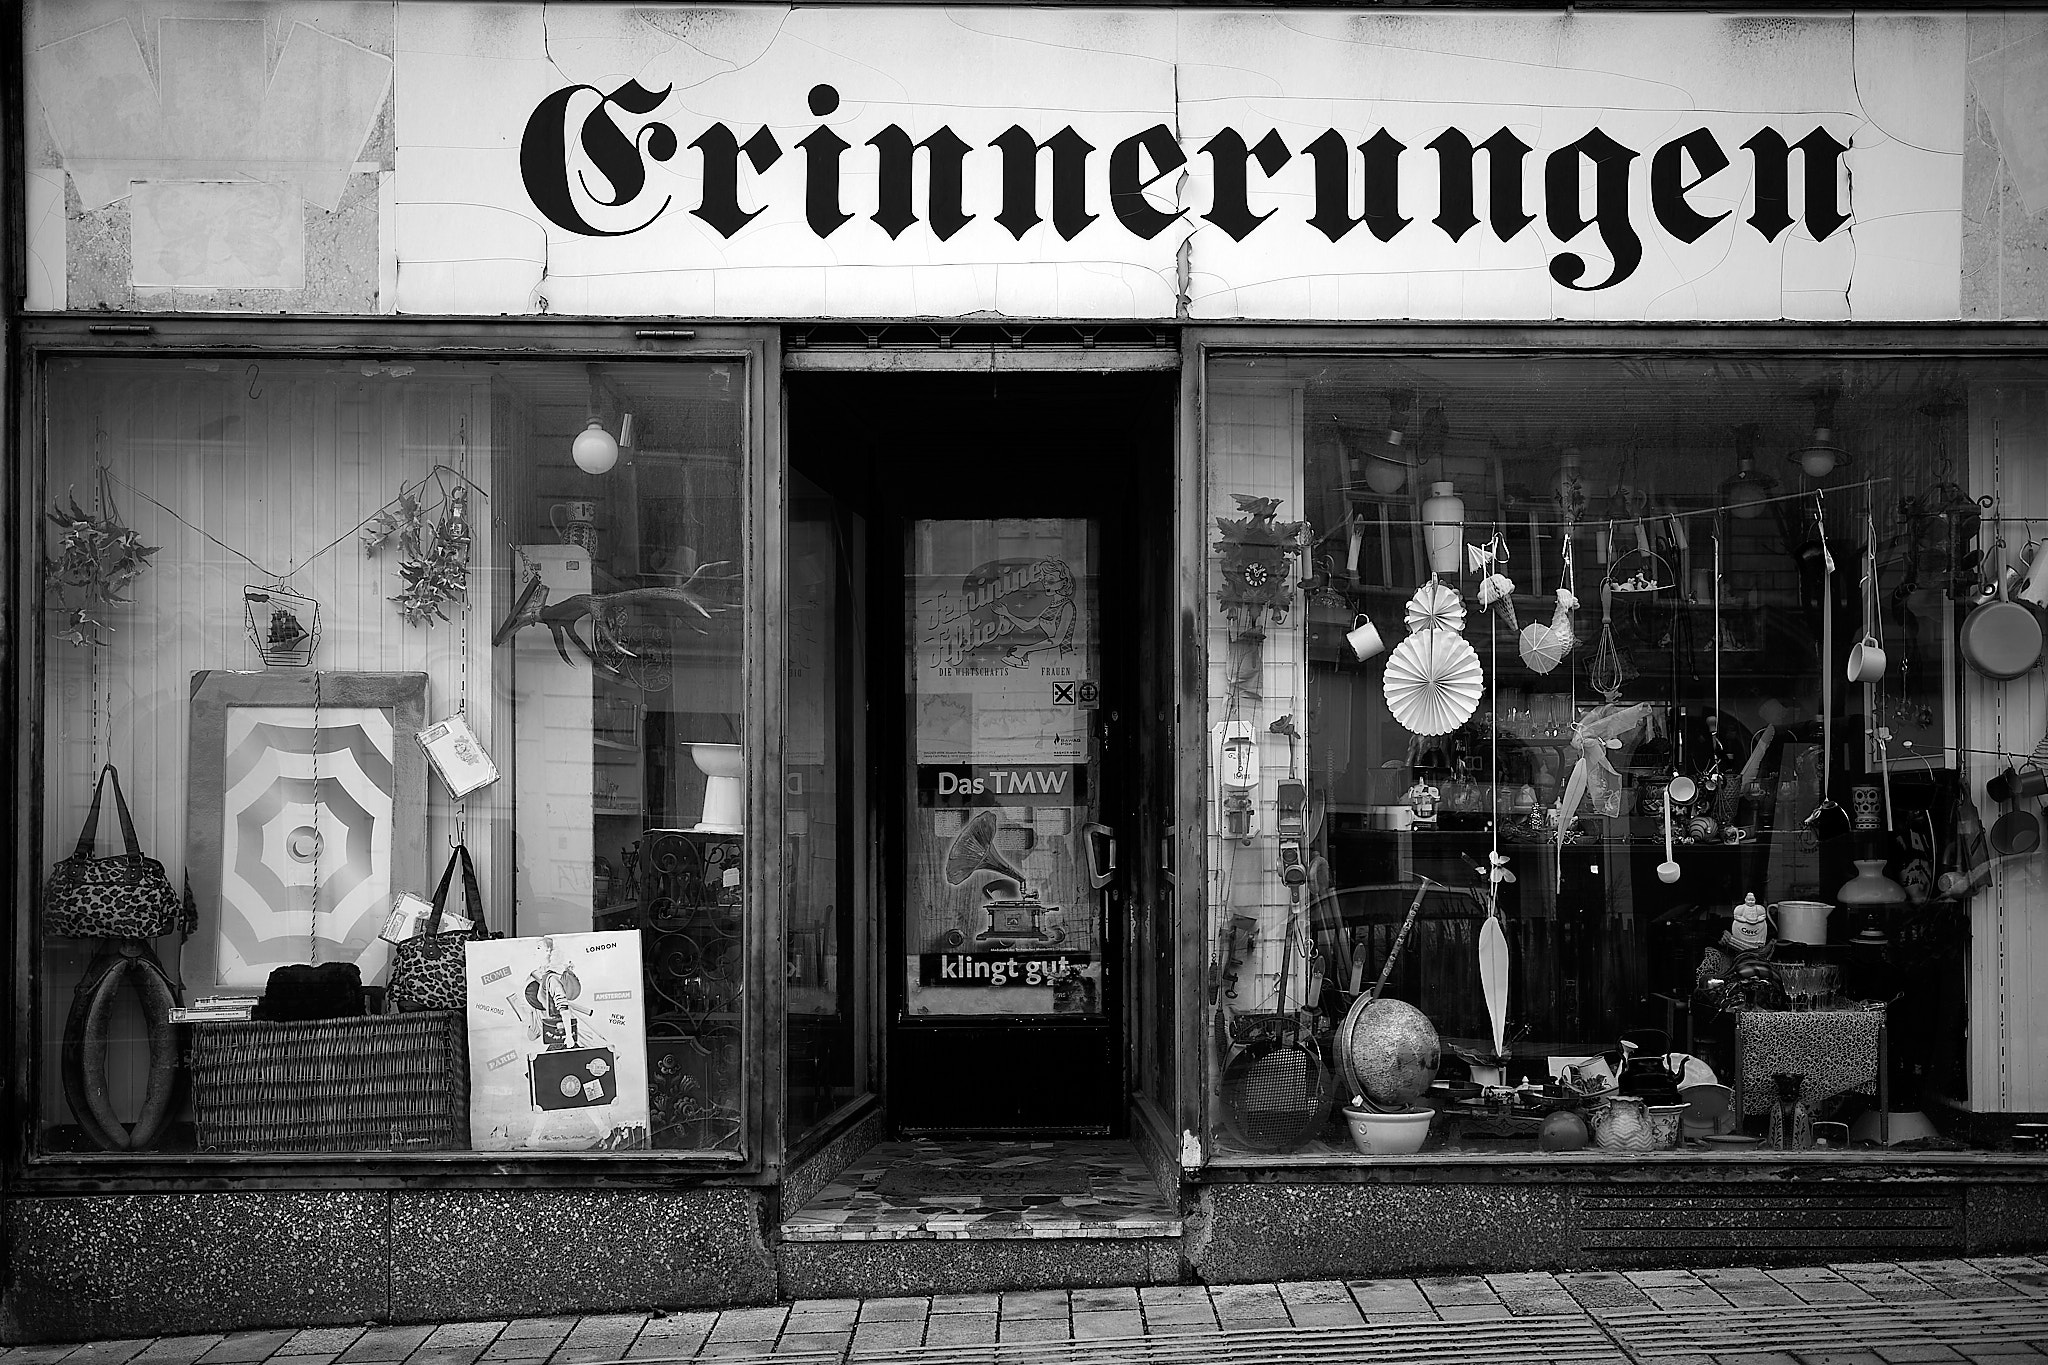 Black and white photo of a quaint storefront with the word "Erinnerungen" above the window, displaying various items including bags, lamps, ornaments, and a poster with text "Das TMW klingt gut" visible through the glass door.